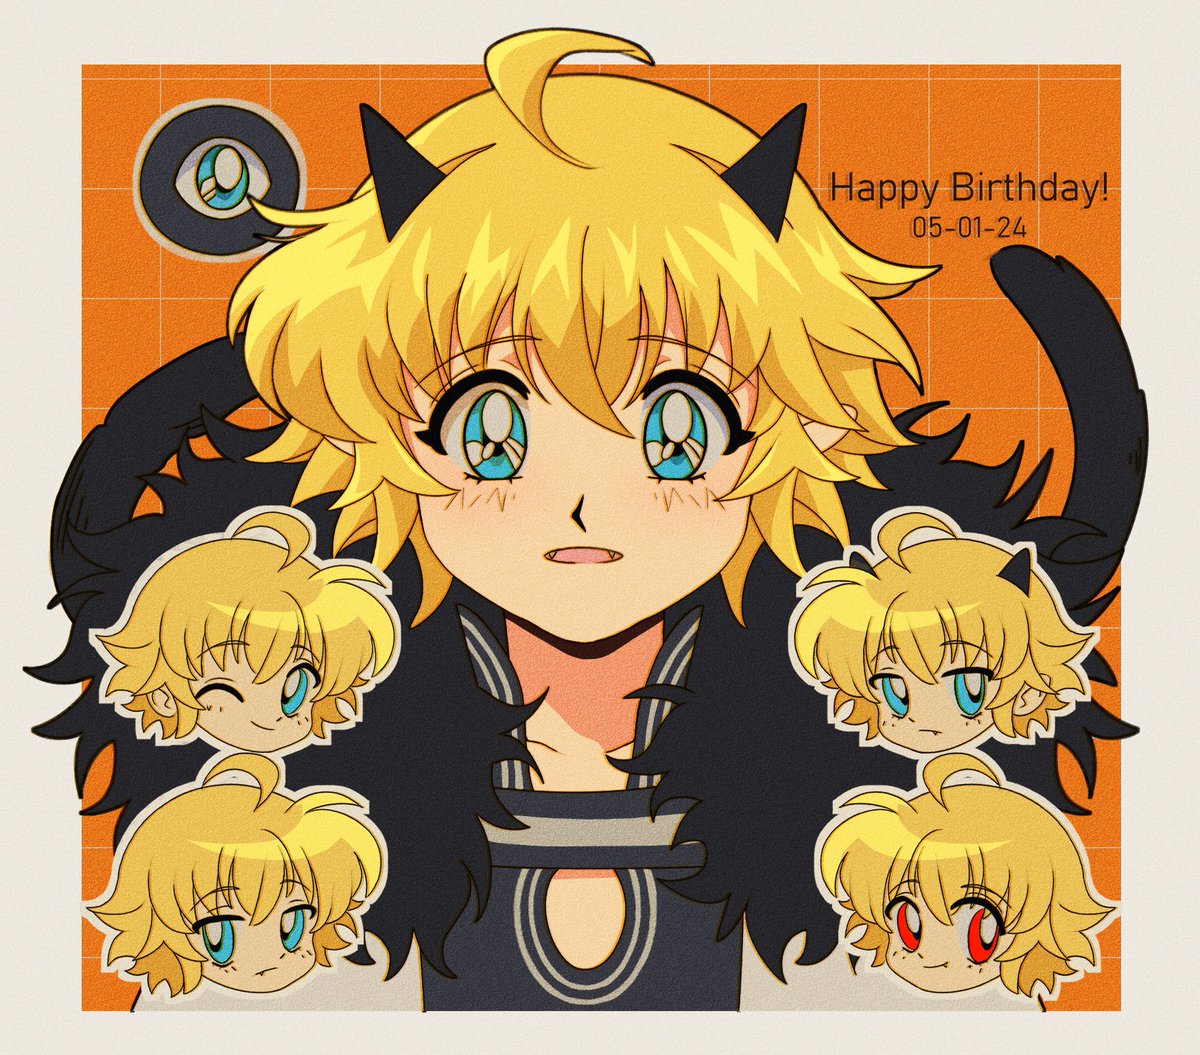 just realized there's something funny about celebrating an immortal demon's birthday...here's to the day we can celebrate it when he's human...!
#owarinoseraph